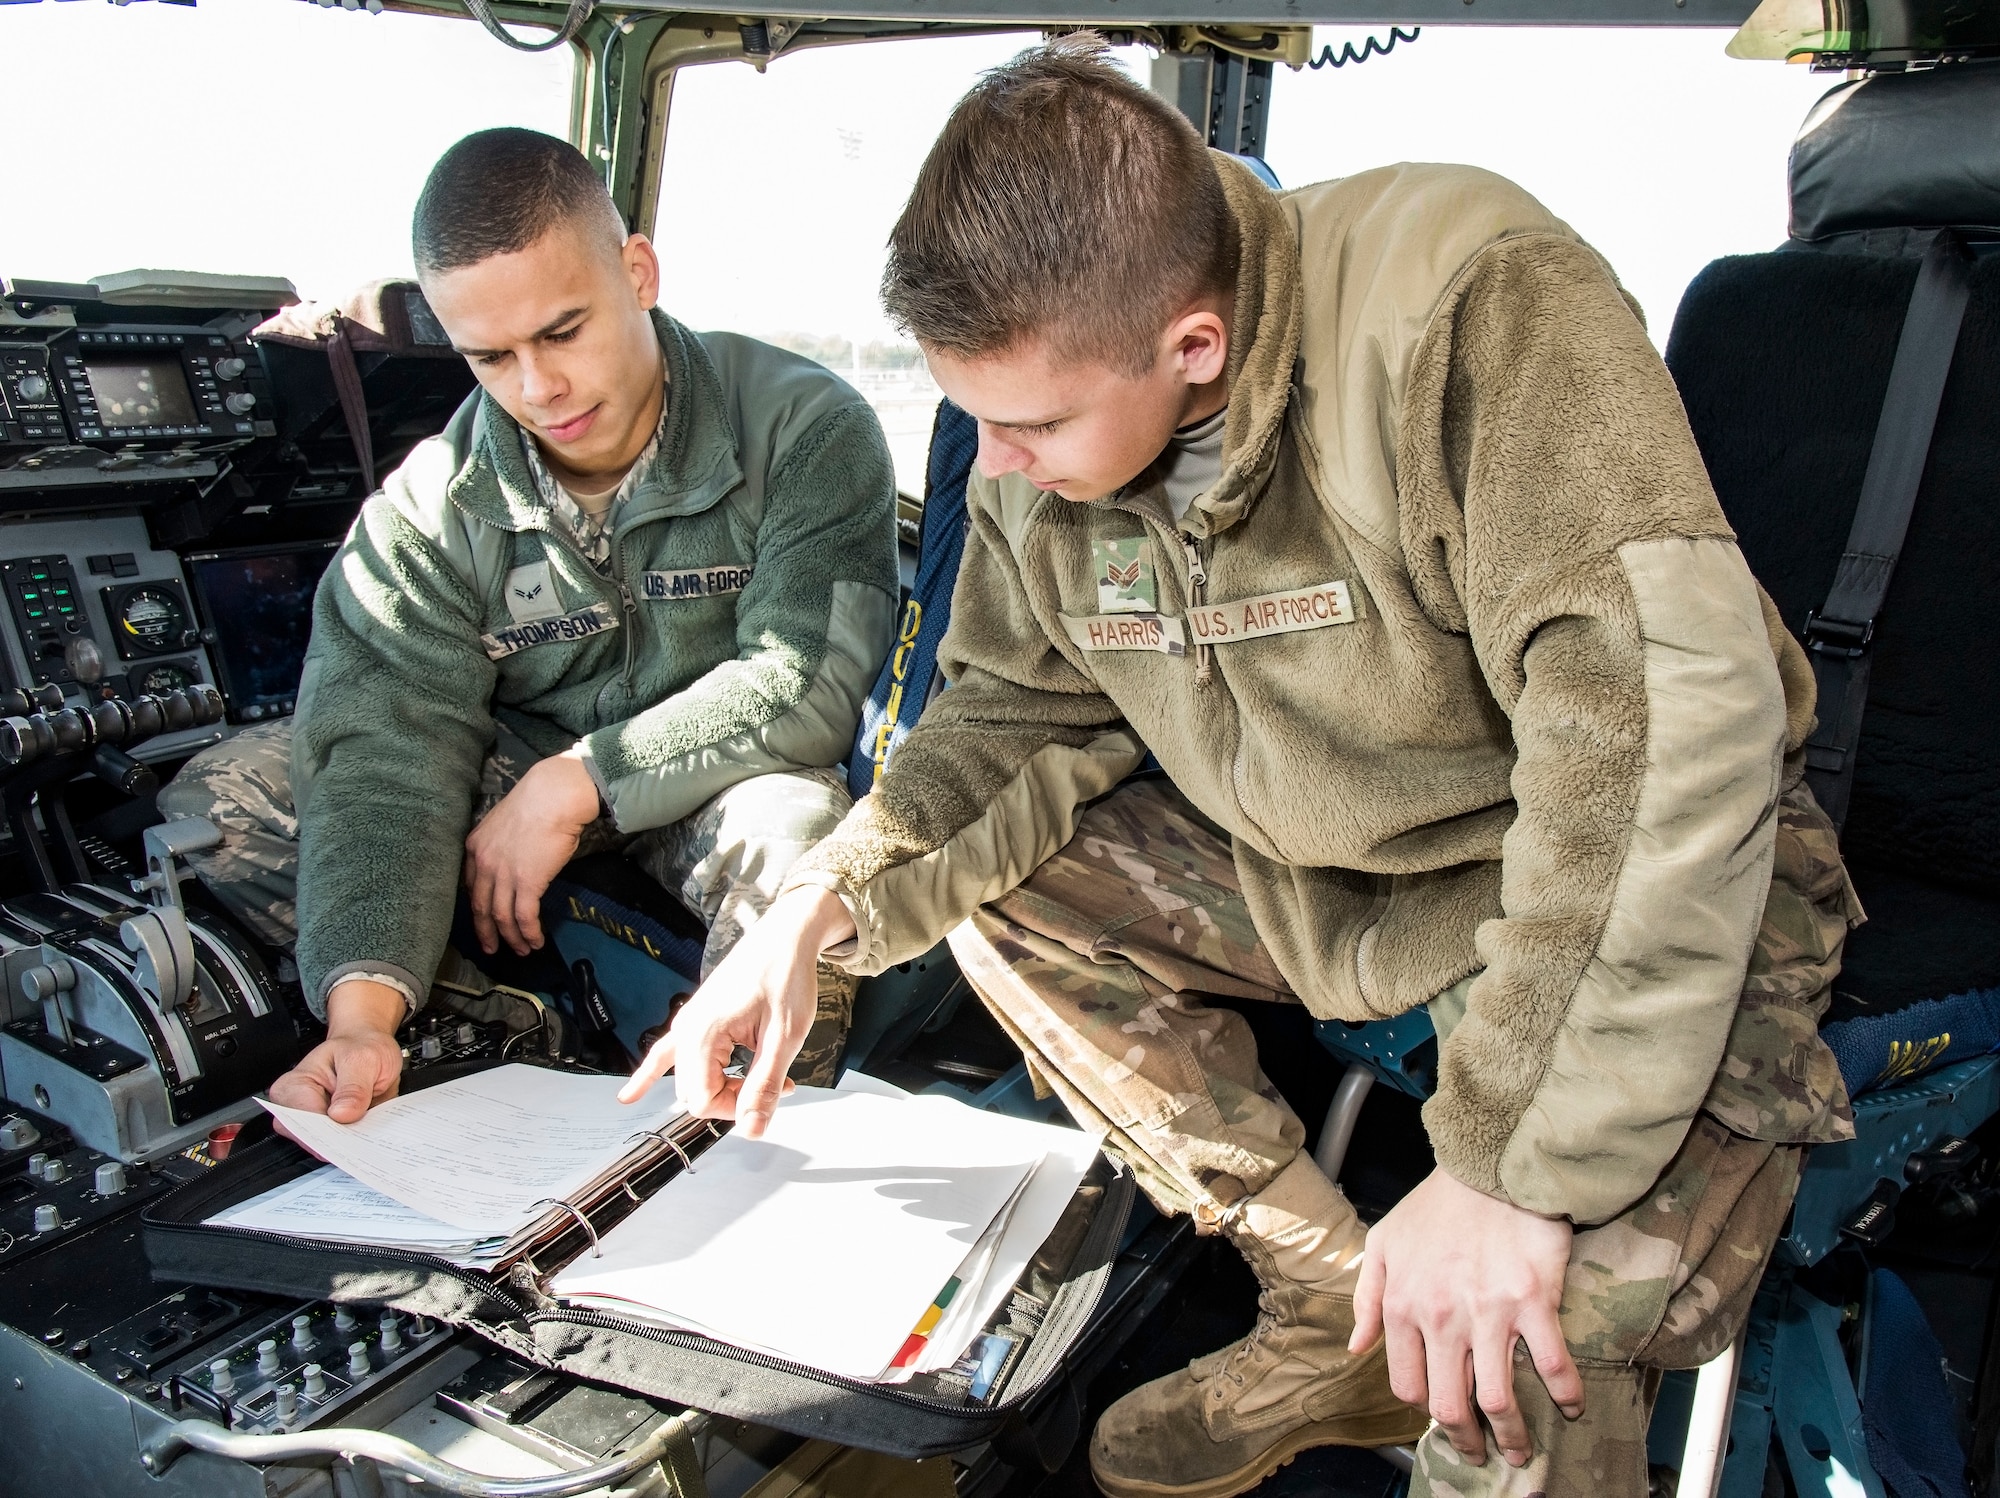 Senior Airman Victor Harris, right, Dedicated Crew Chief, and Airman 1st Class Jason Thompson, left, Assistant DCC, both assigned to the 736th Aircraft Maintenance Squadron, review the aircraft forms of a C-17 Globemaster III Nov. 21, 2018, at Dover Air Force Base, Del. Harris and Thompson were formally appointed as DCC and ADCC of their assigned aircraft during a formal induction ceremony held Nov. 16. (U.S. Air Force photo by Roland Balik)